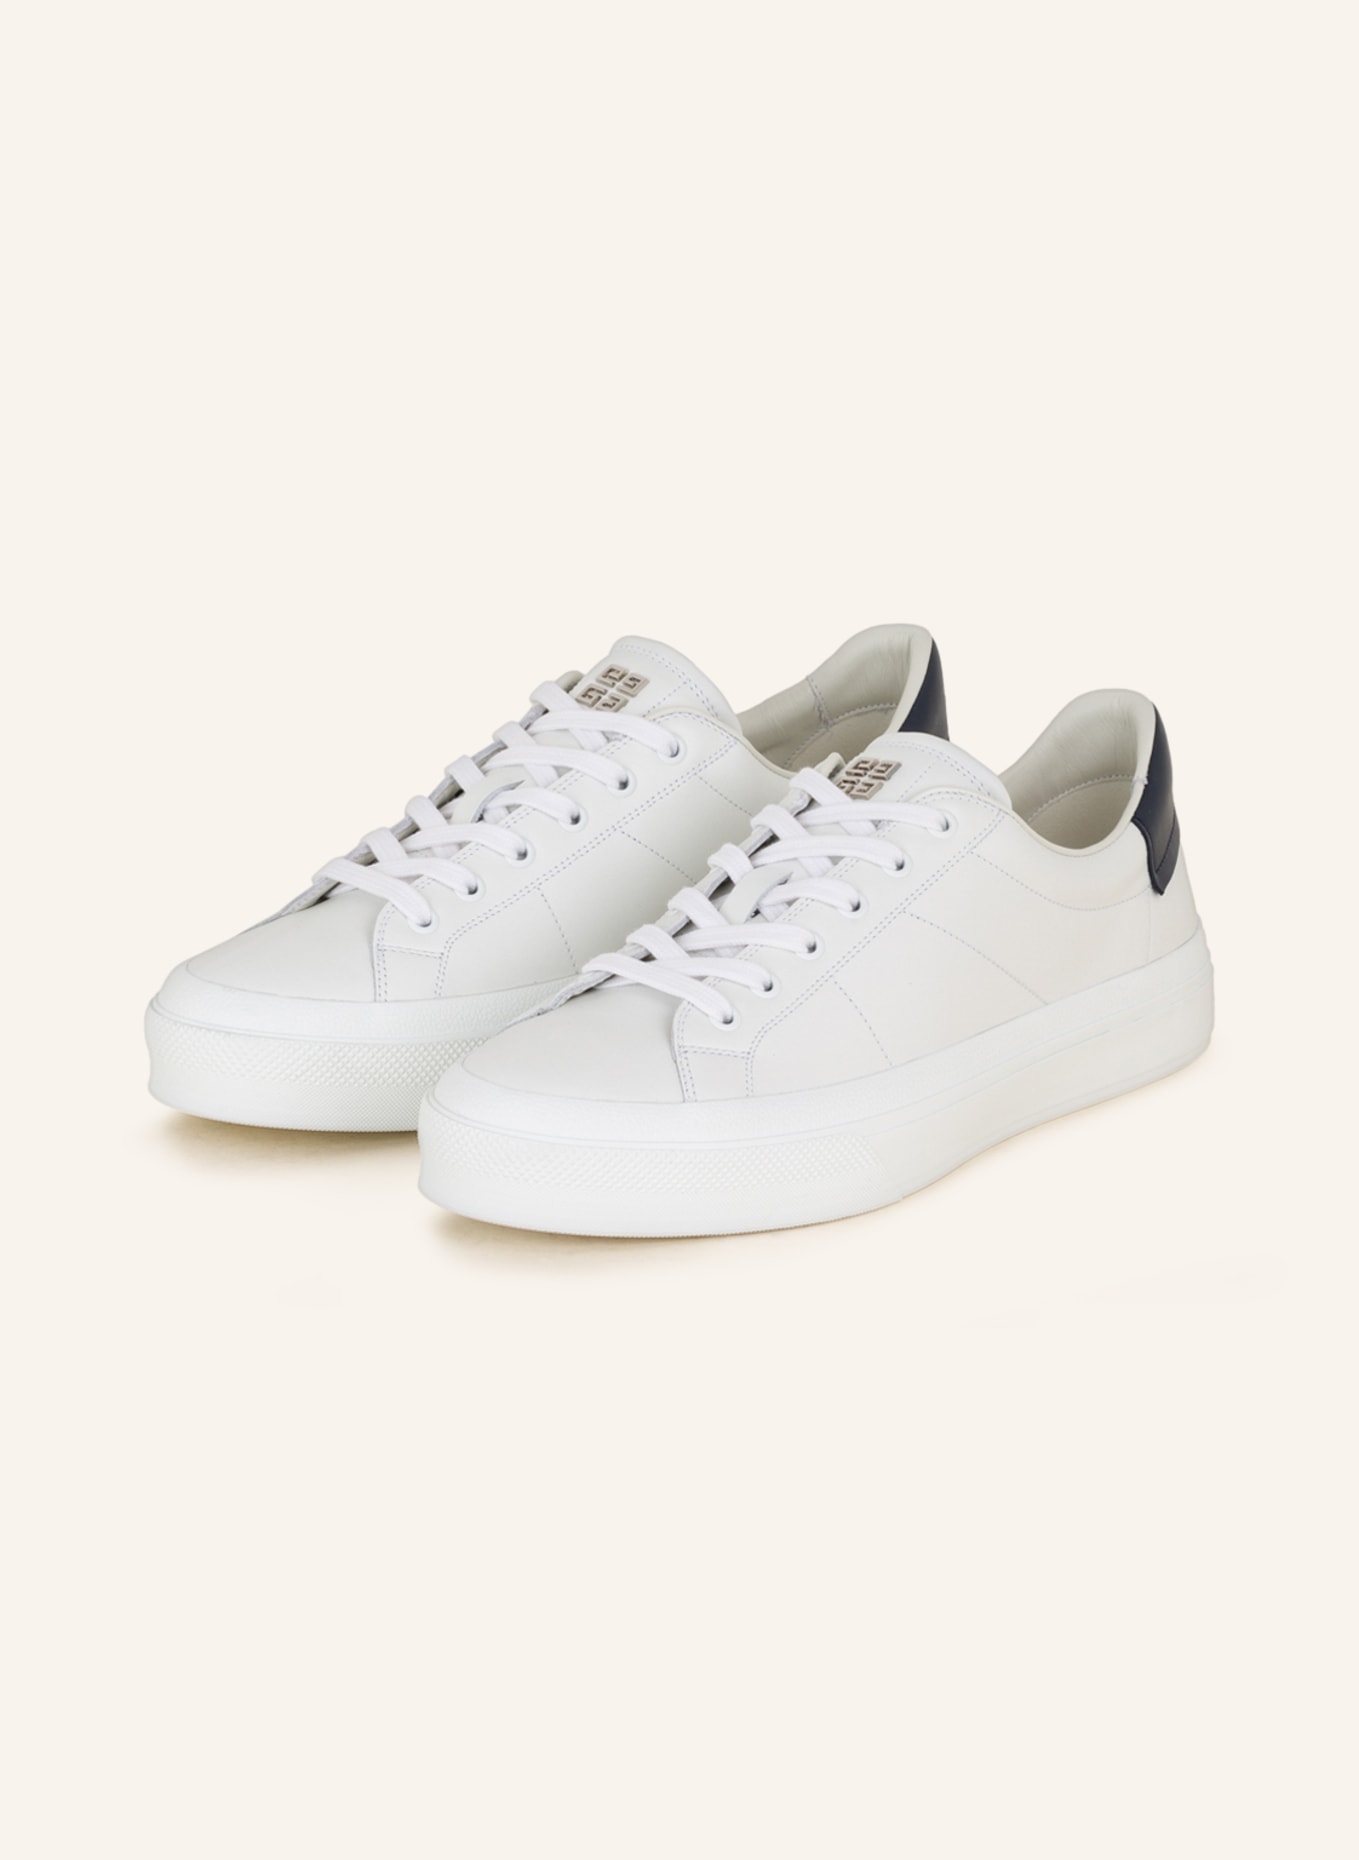 Givenchy Men's City Logo Low Top Sneakers - 150th Anniversary Exclusive |  Bloomingdale's